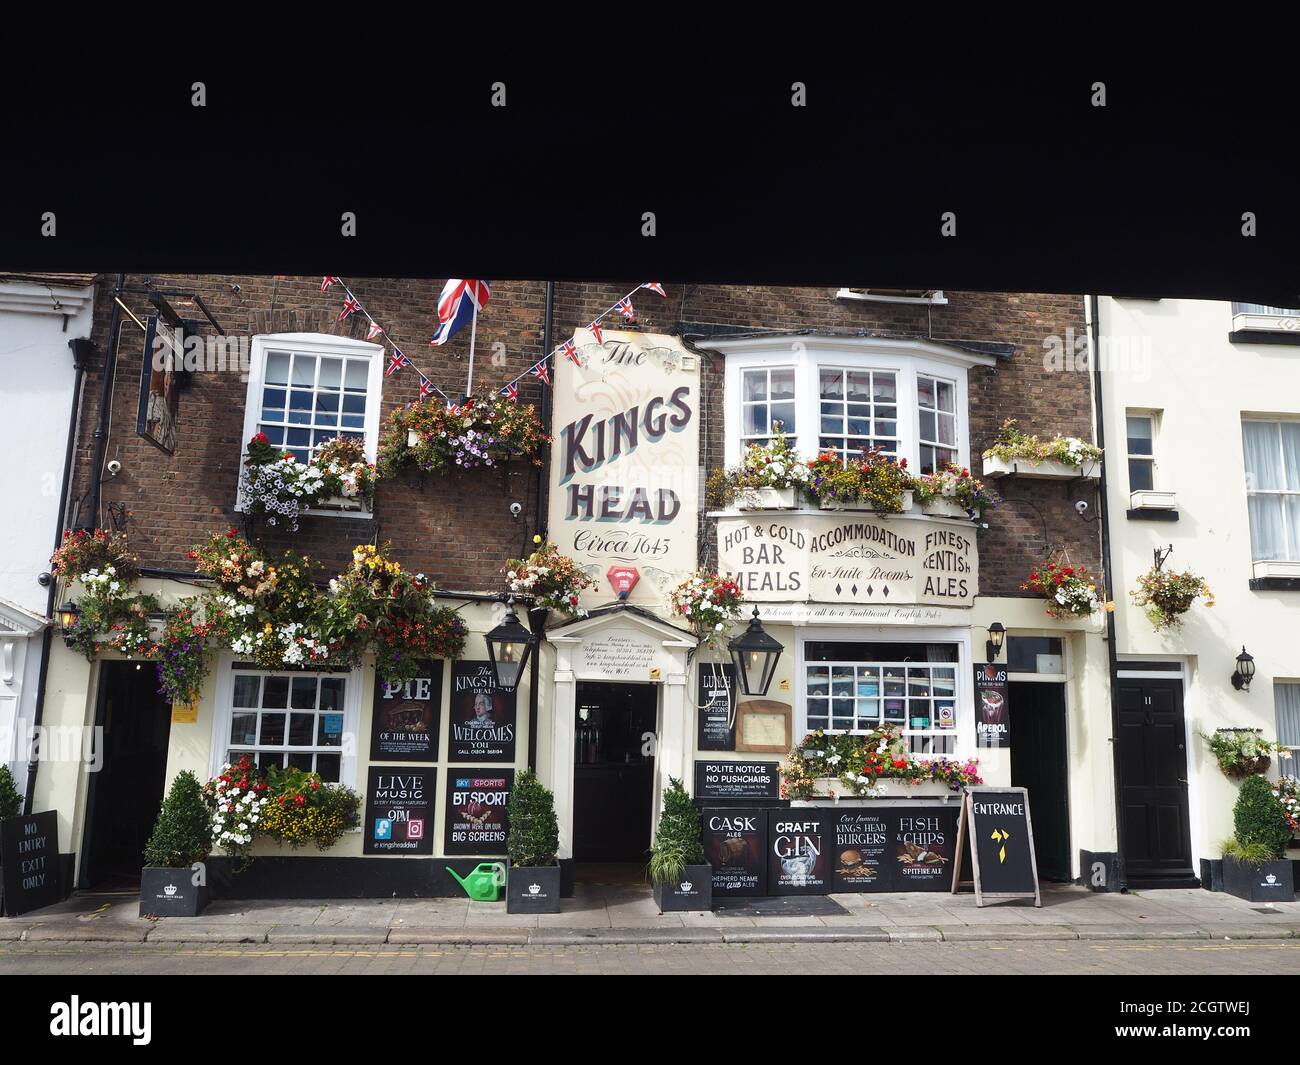 The King's Head pub in Deal, Kent, UK Stock Photo